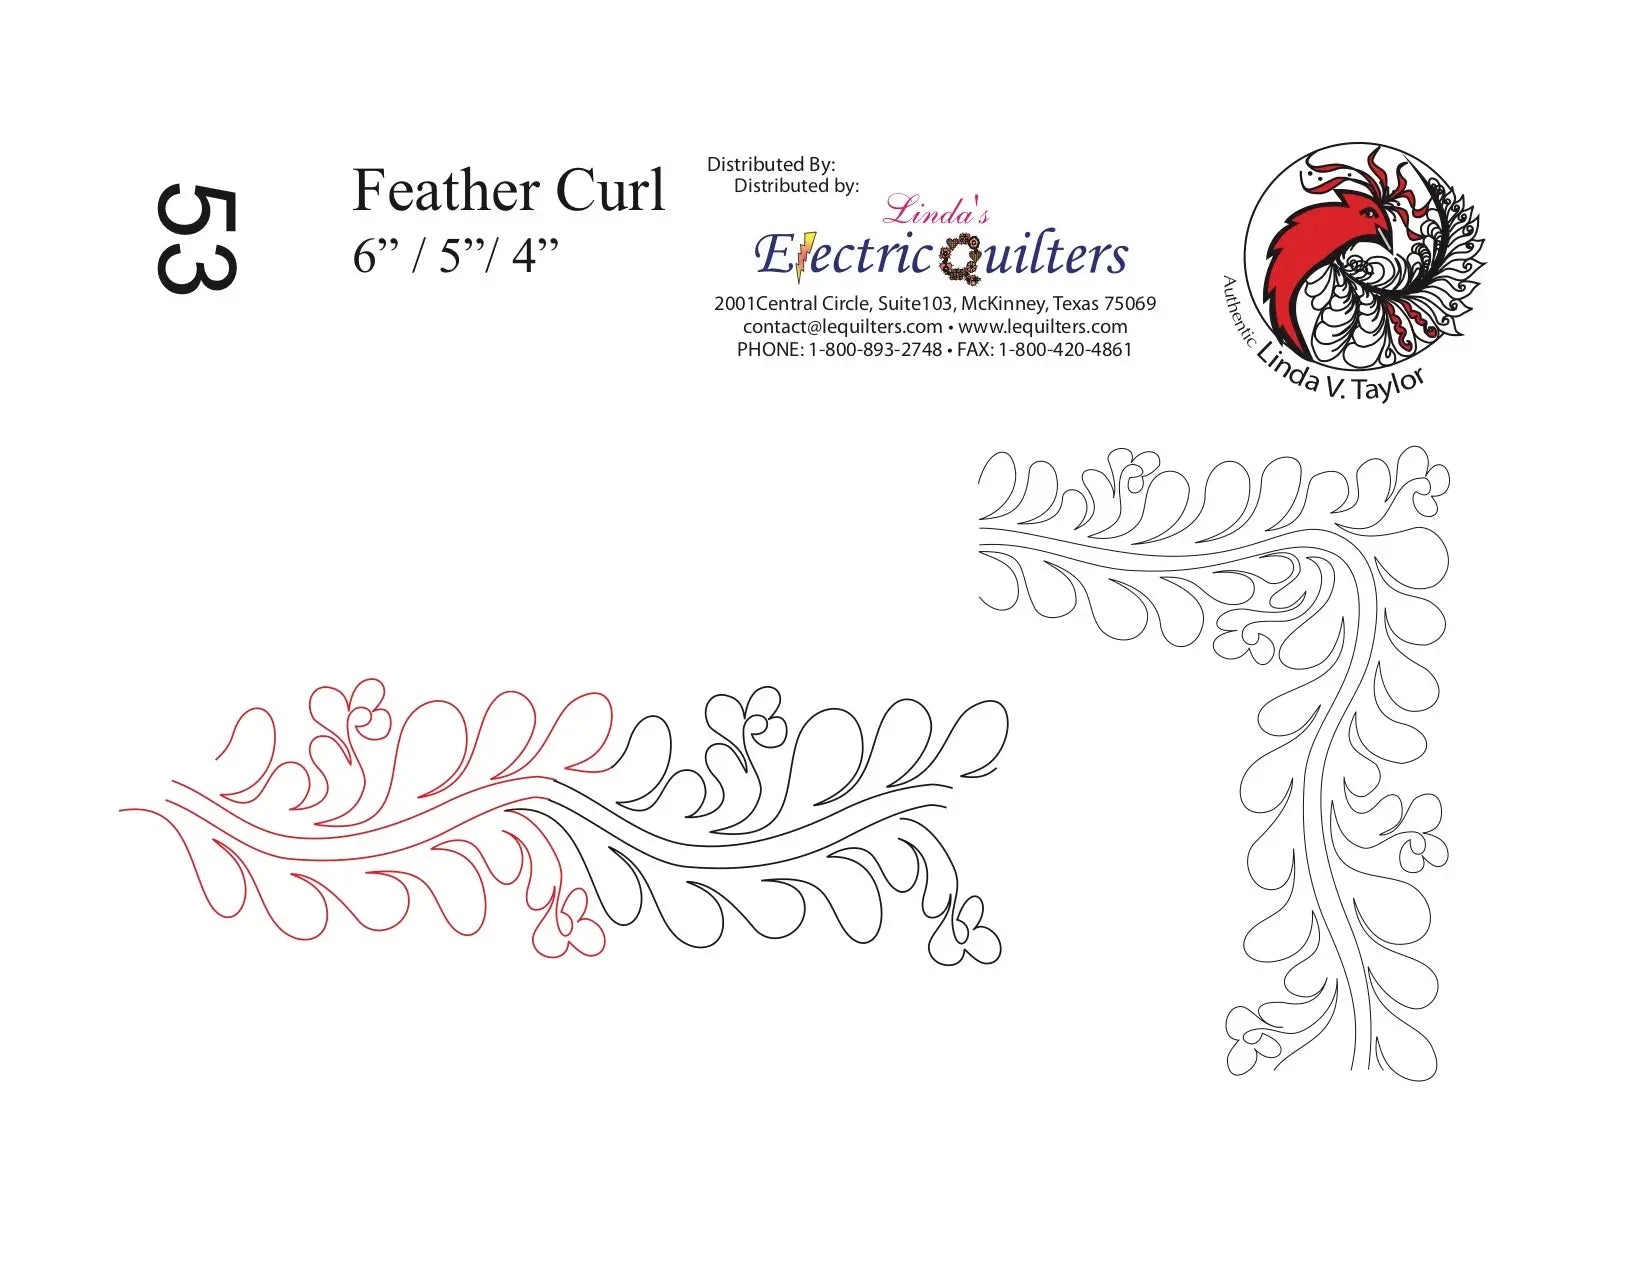 053 Feather Curl Pantograph by Linda V. Taylor - Linda's Electric Quilters